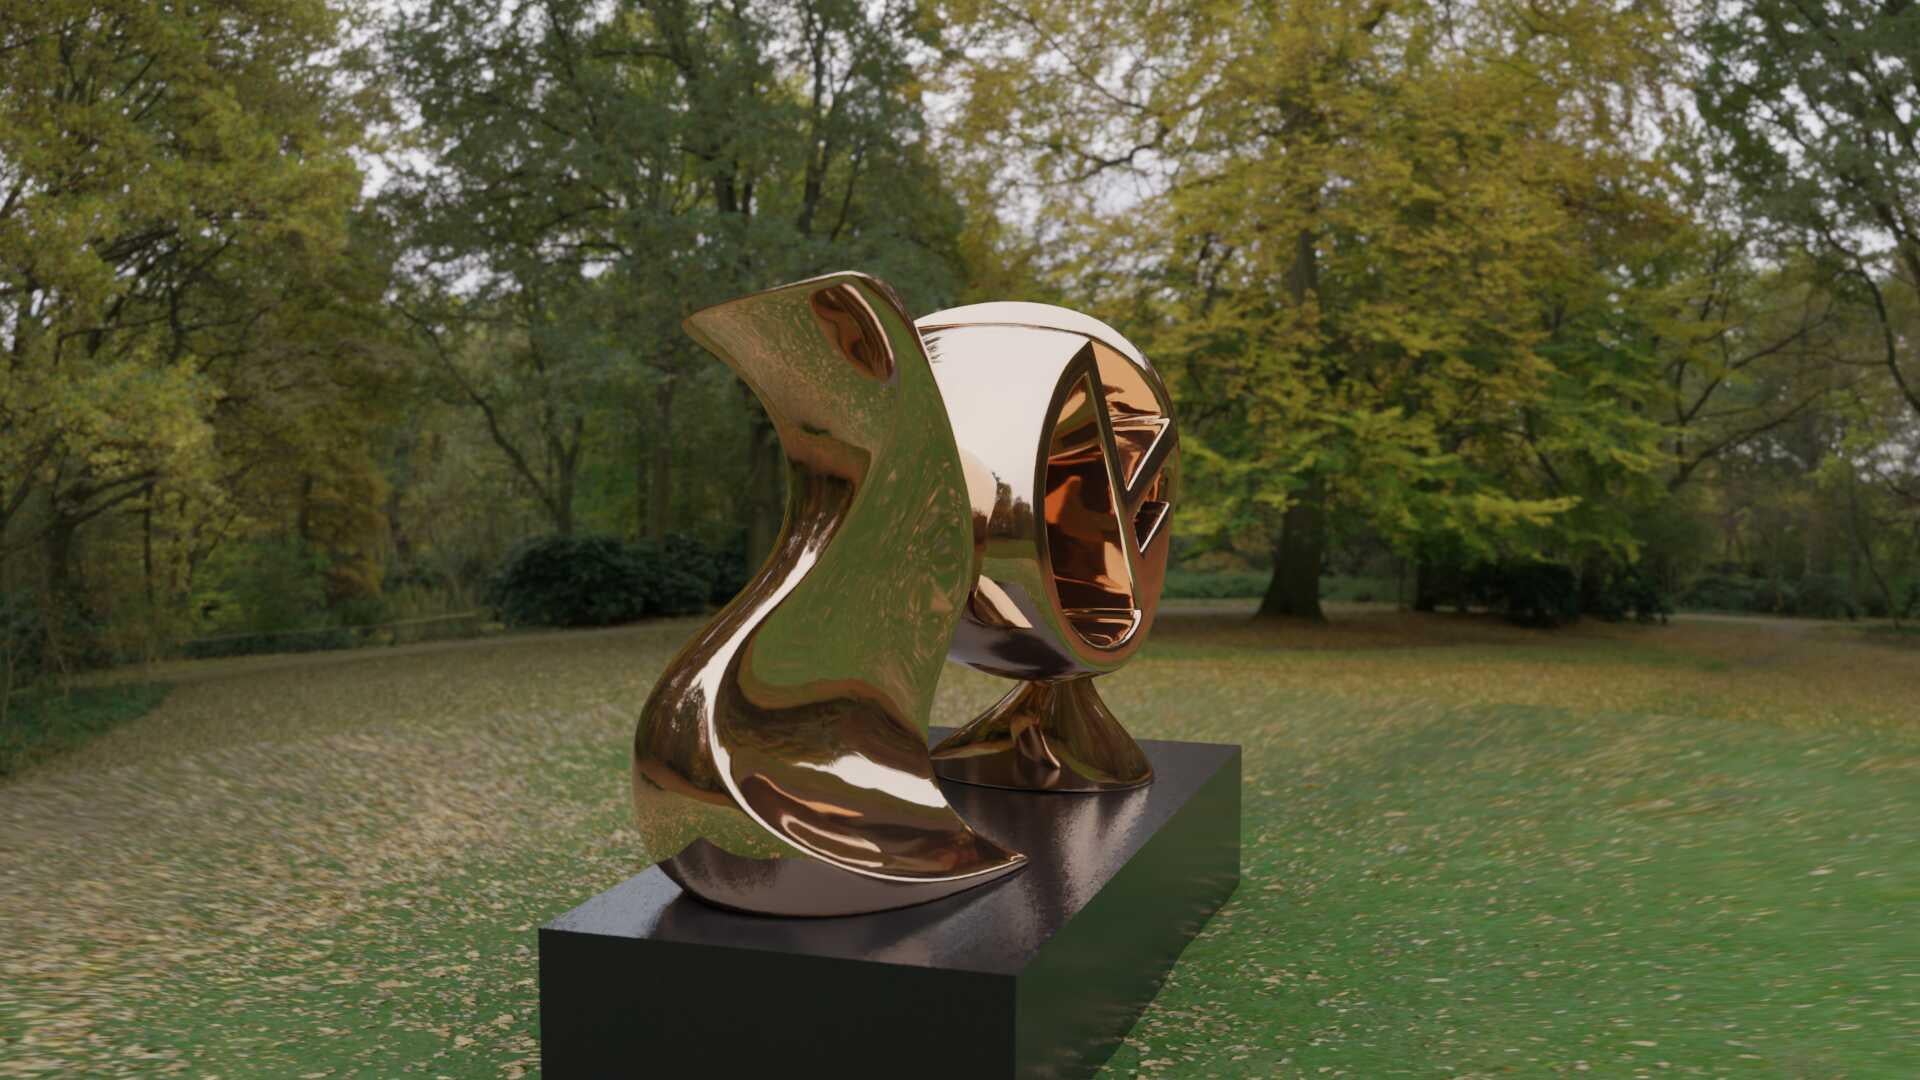 Horizontal Harmony - Gold Abstract Sculpture by Jan Willem Krijger